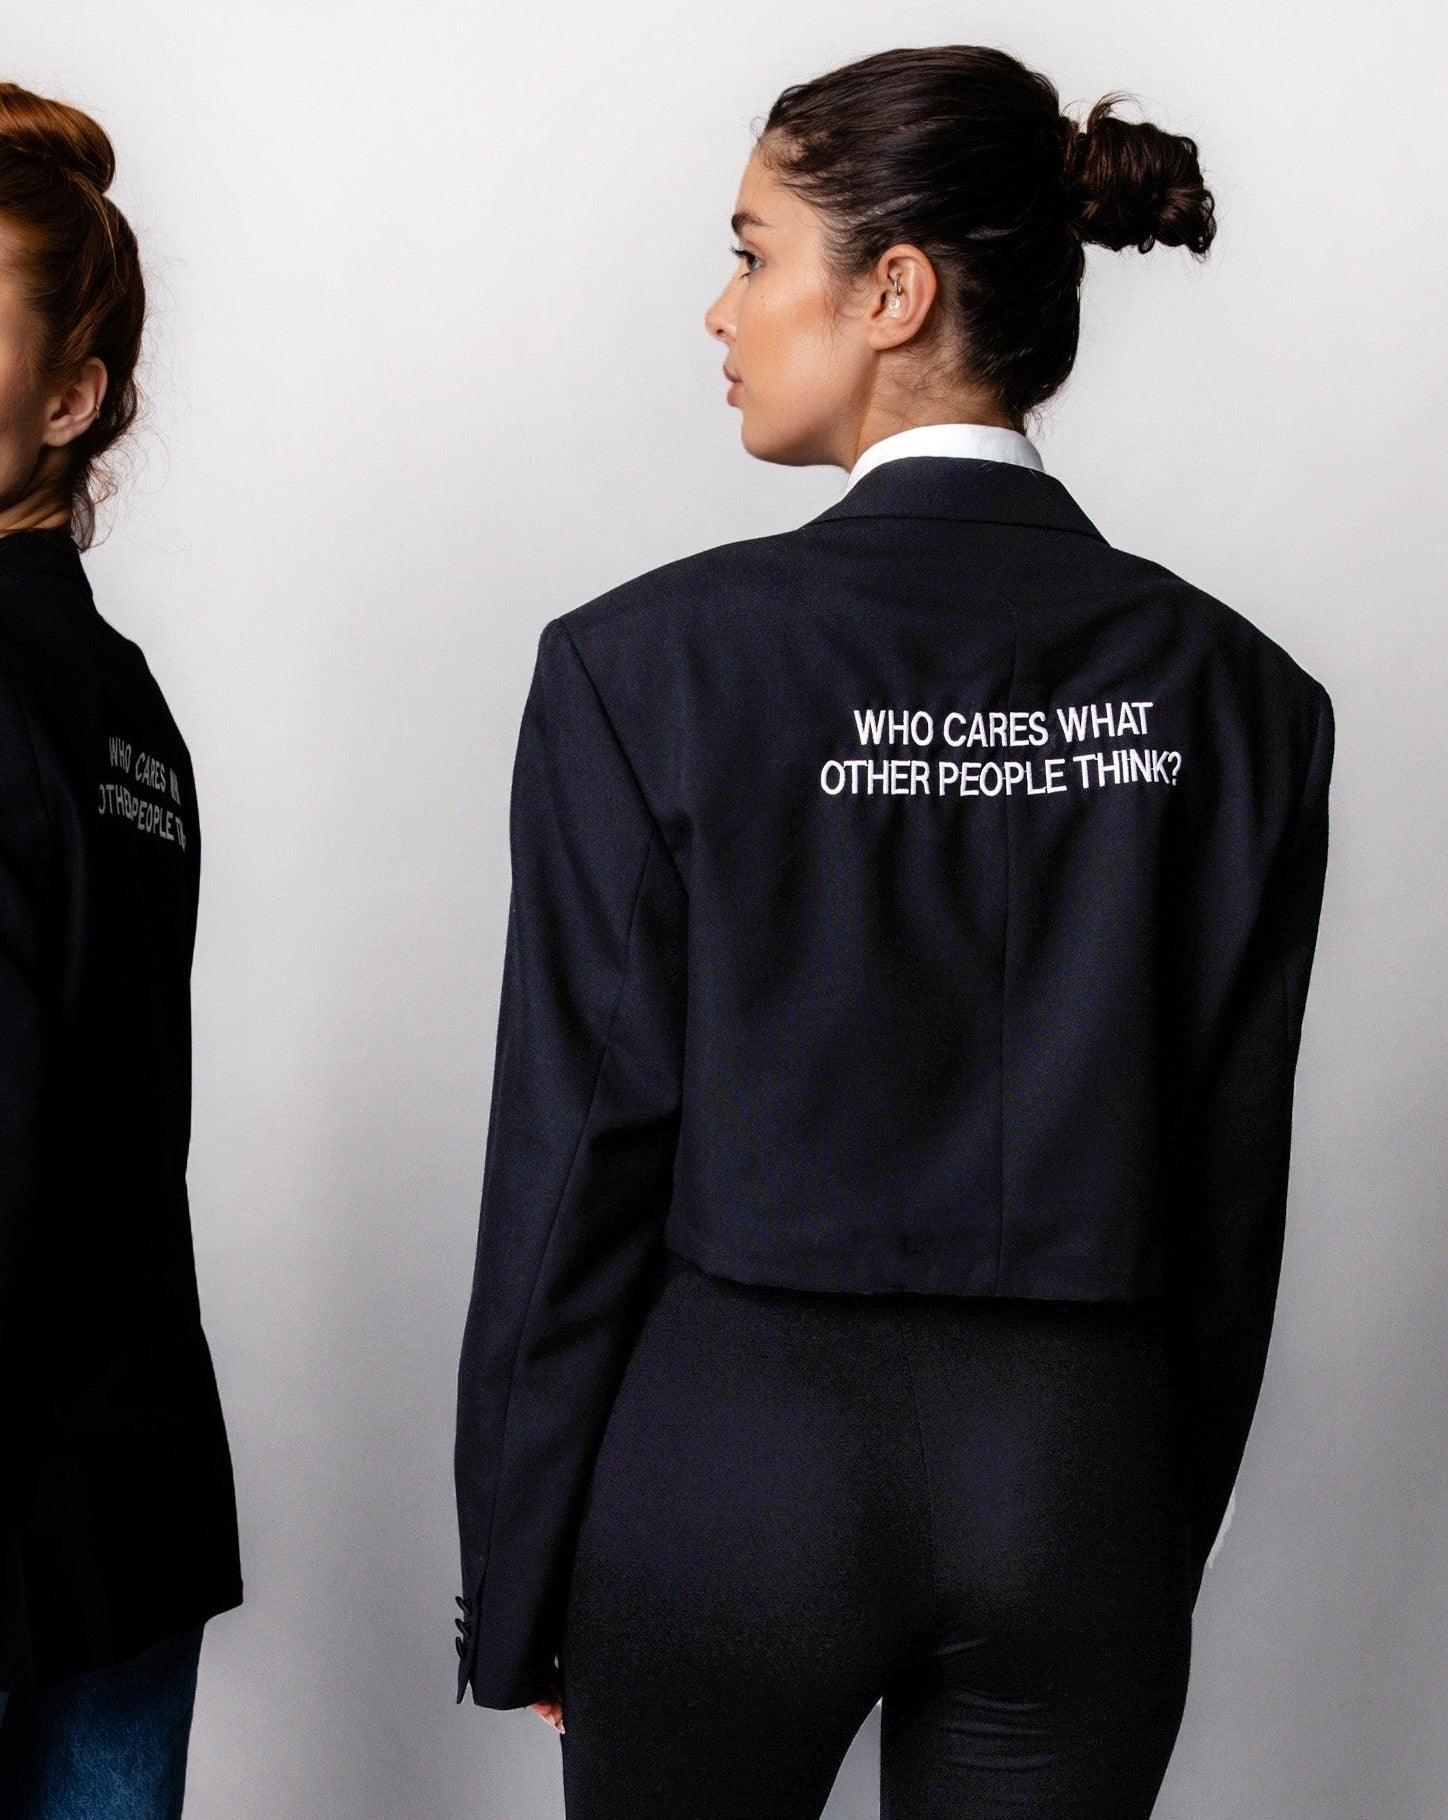 WHO CARES? Cropped Upcycled Blazer - OBLIVIOUS?